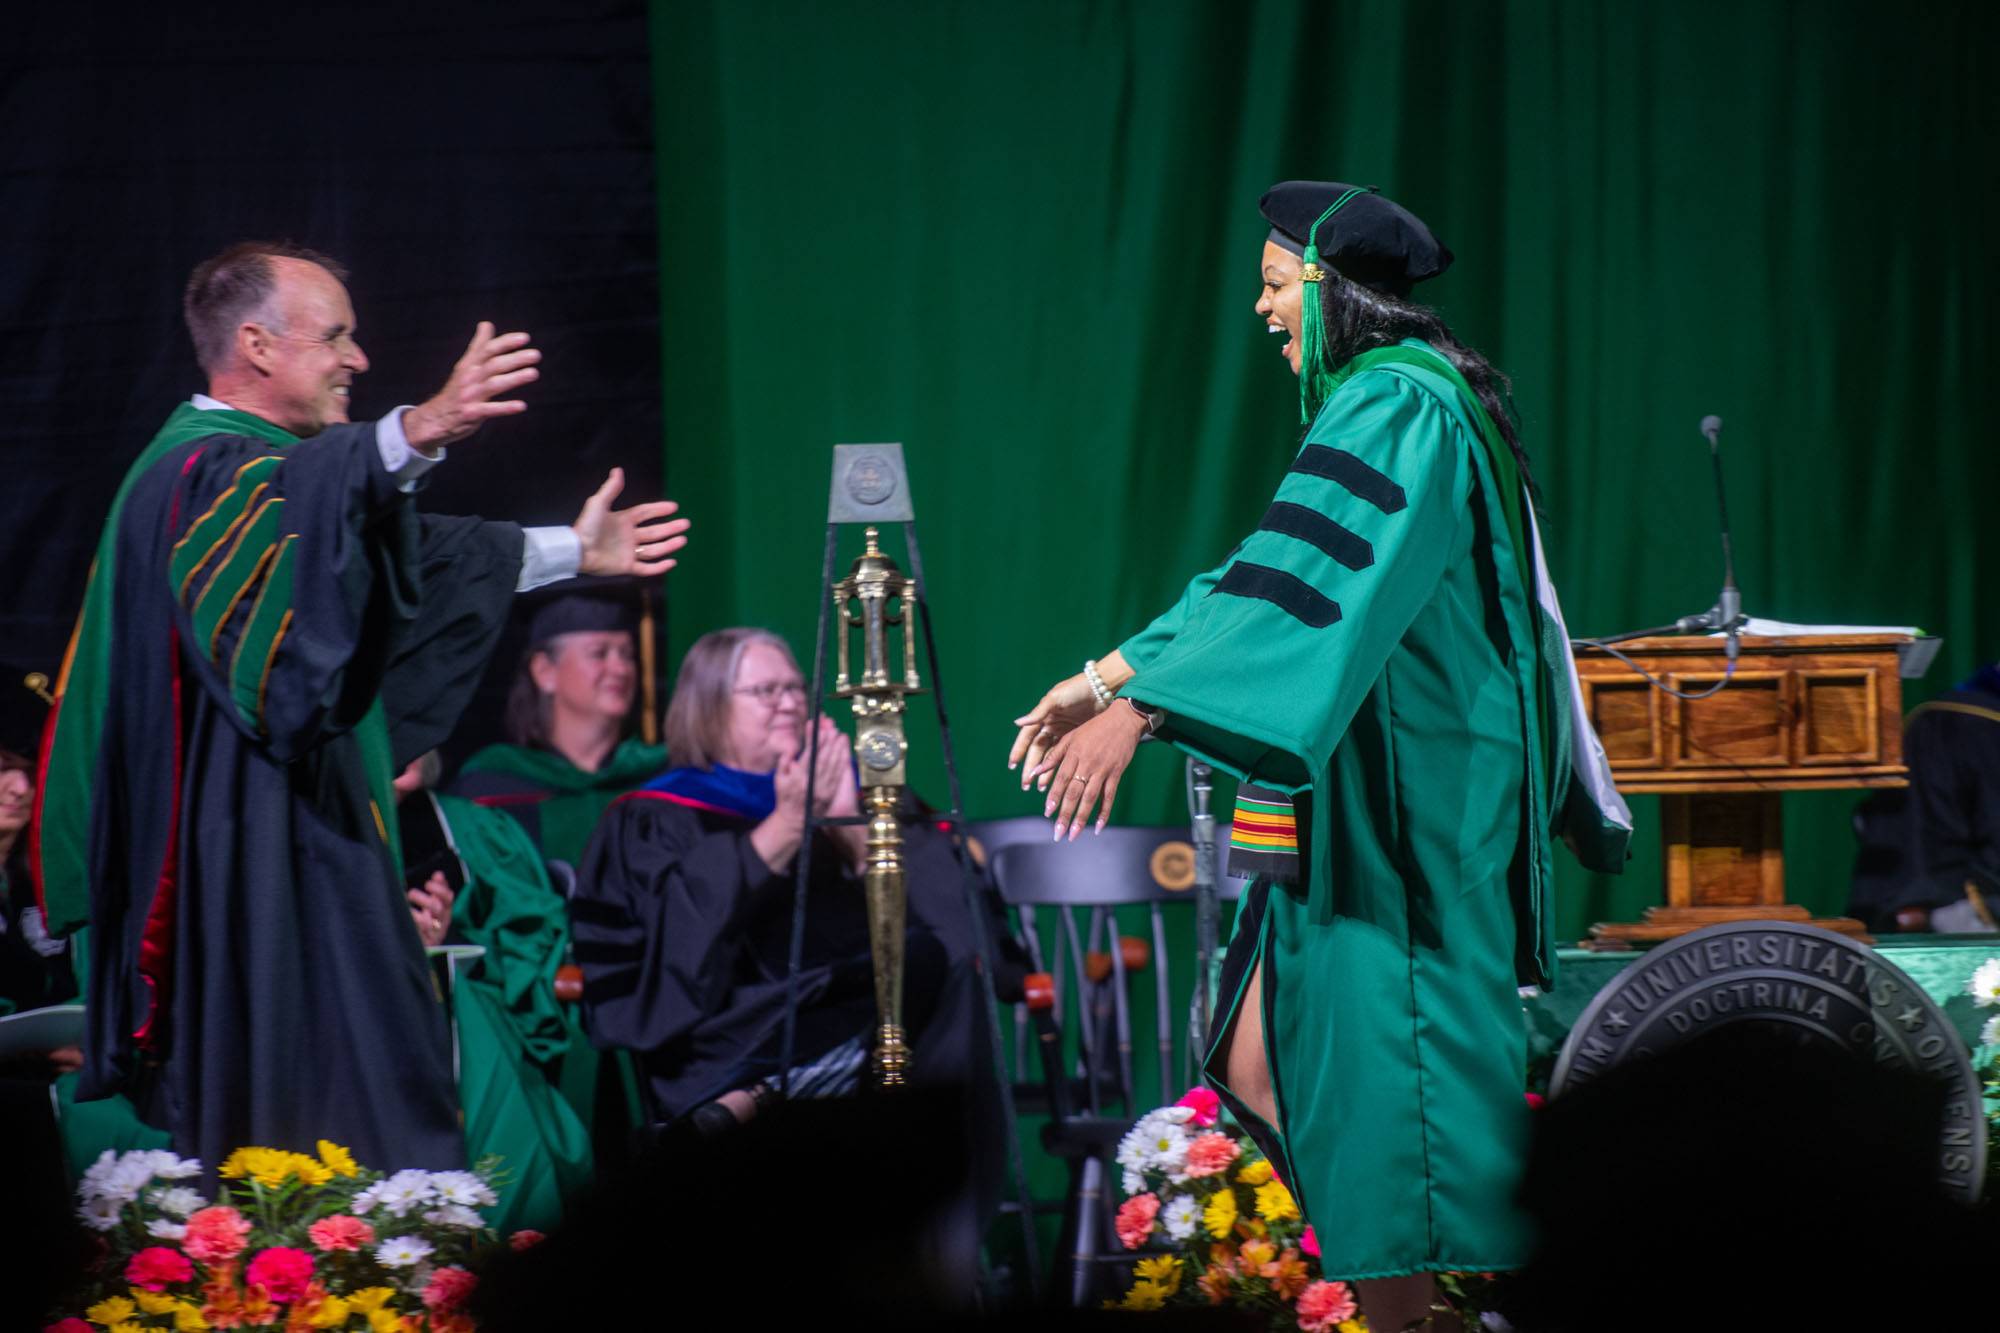 Executive Dean of the Heritage College Ken Johnson, D.O. congratulated the 238 graduates saying how proud he was as he’d watched them transform from first-year medical students into physicians